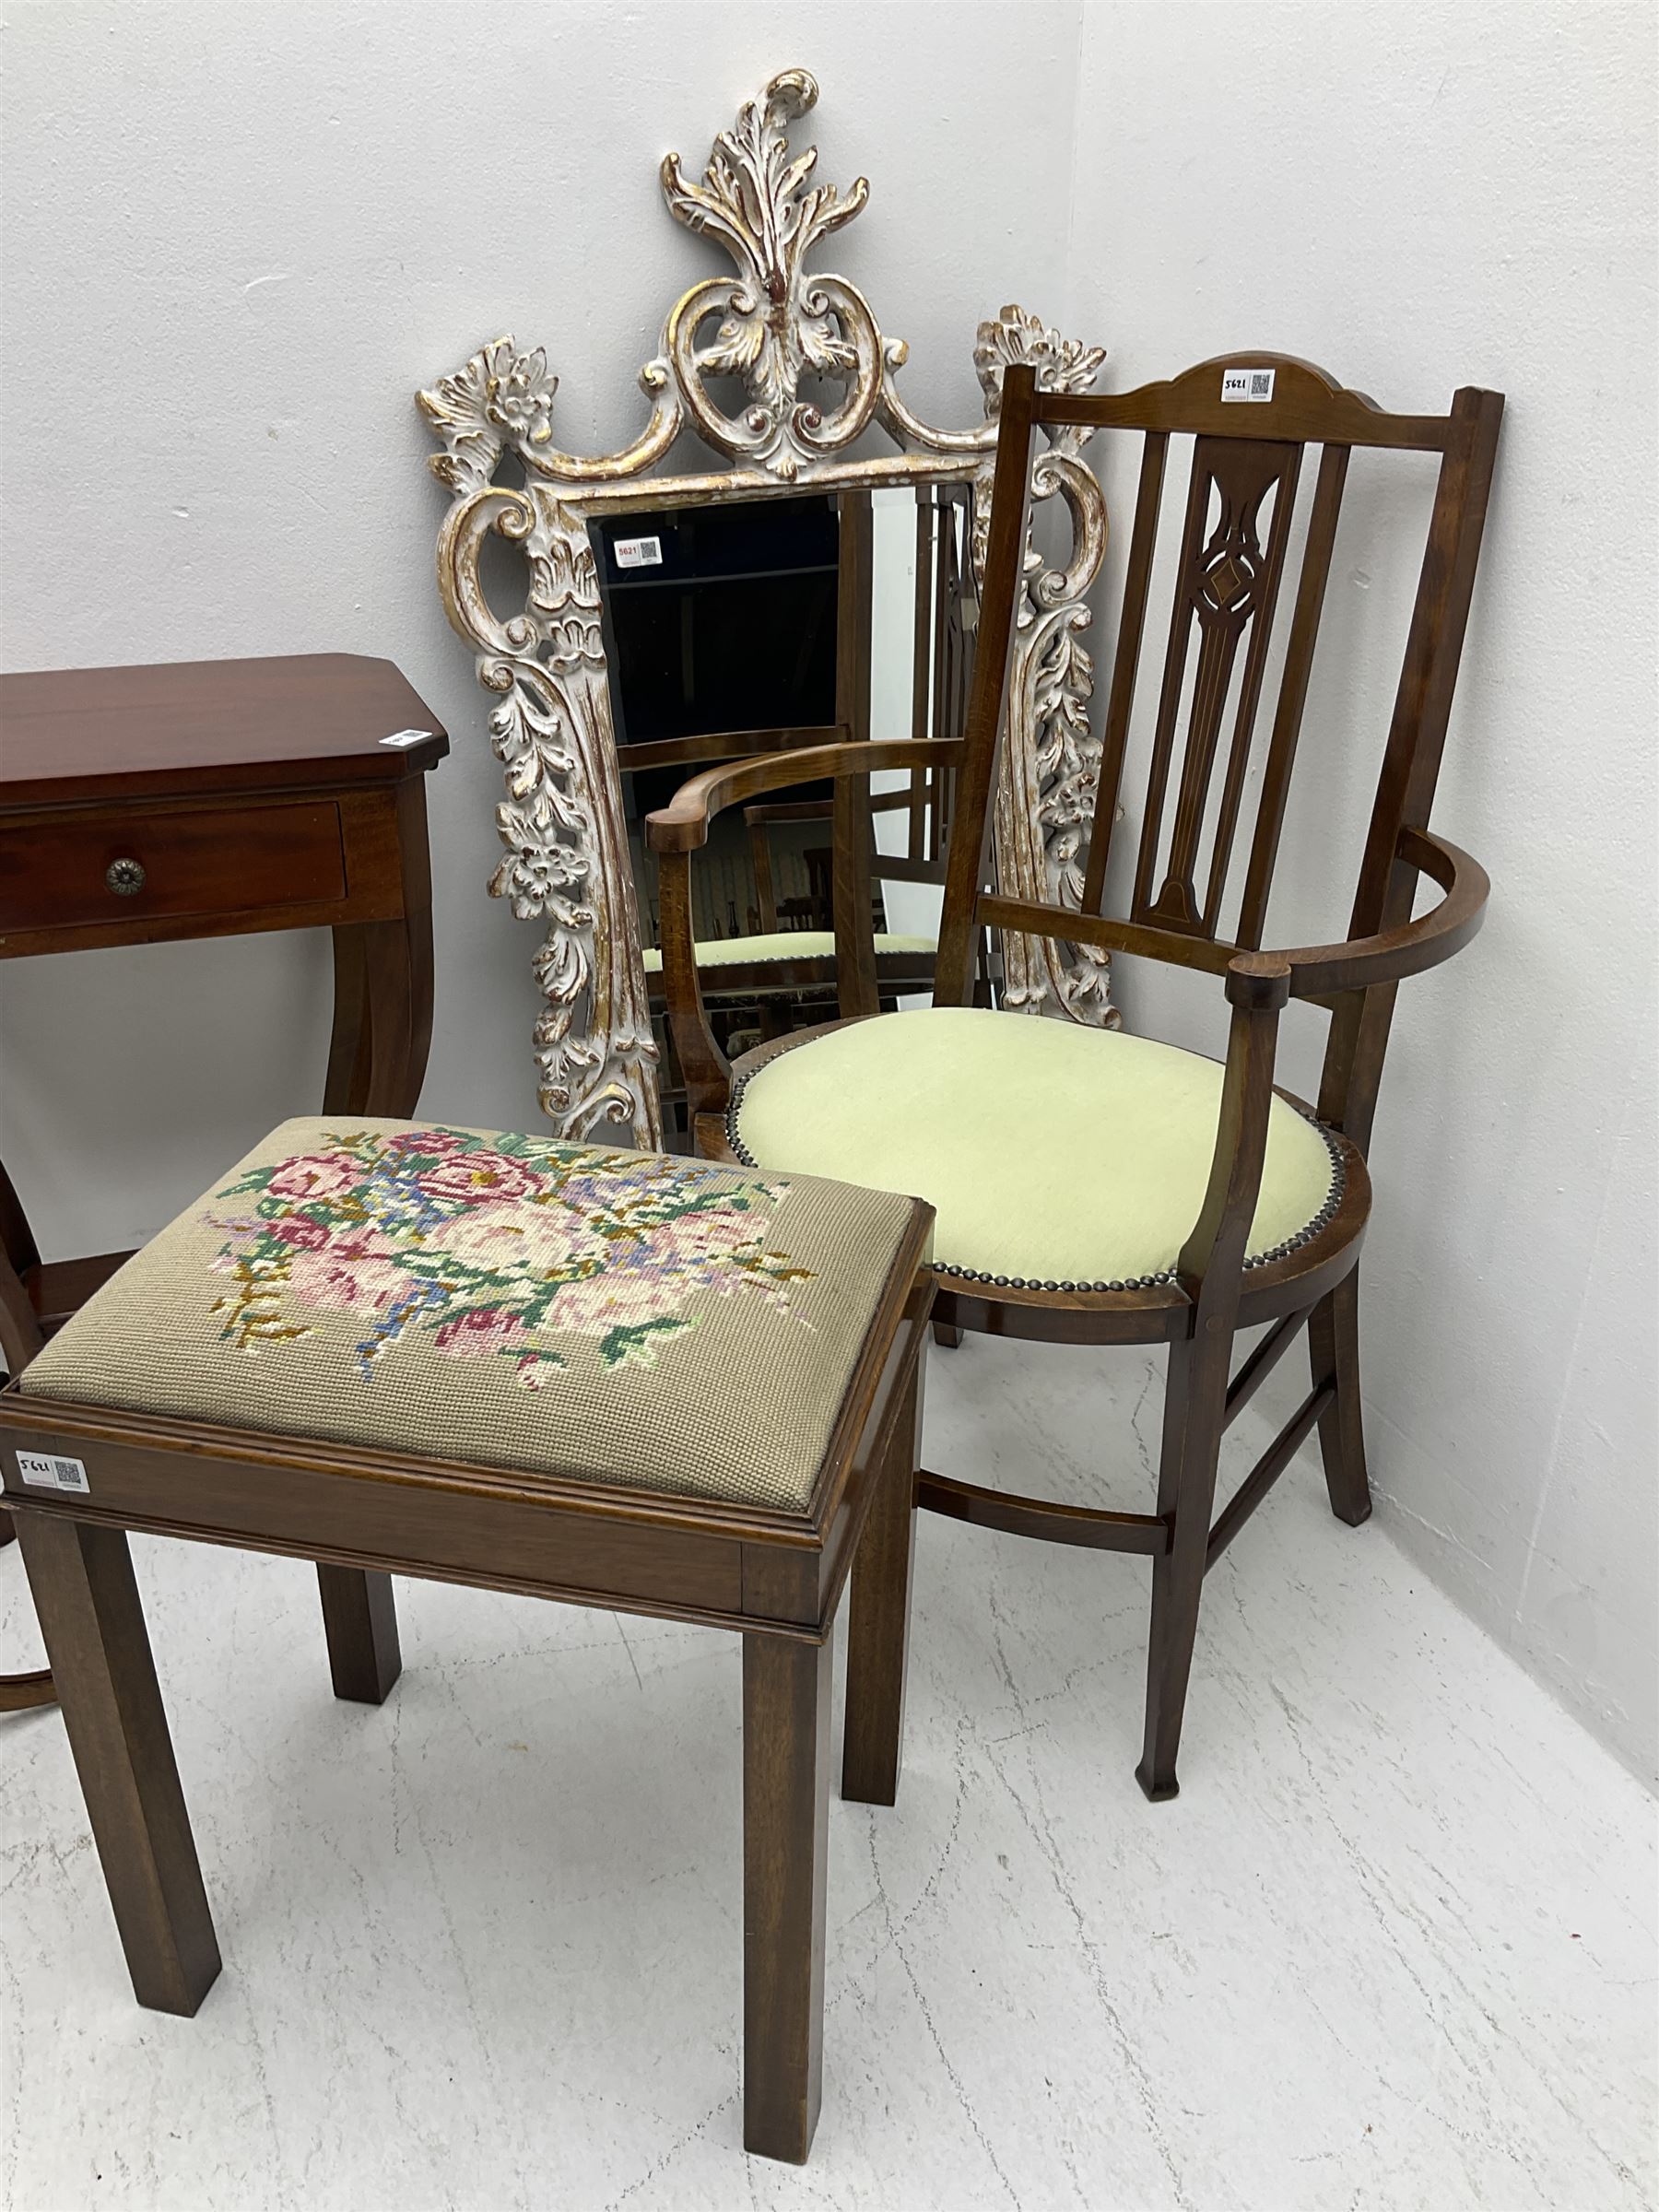 Edwardian inlaid mahogany armchair with oval seat; wine table; Rococo design white and gilt framed m - Image 3 of 5